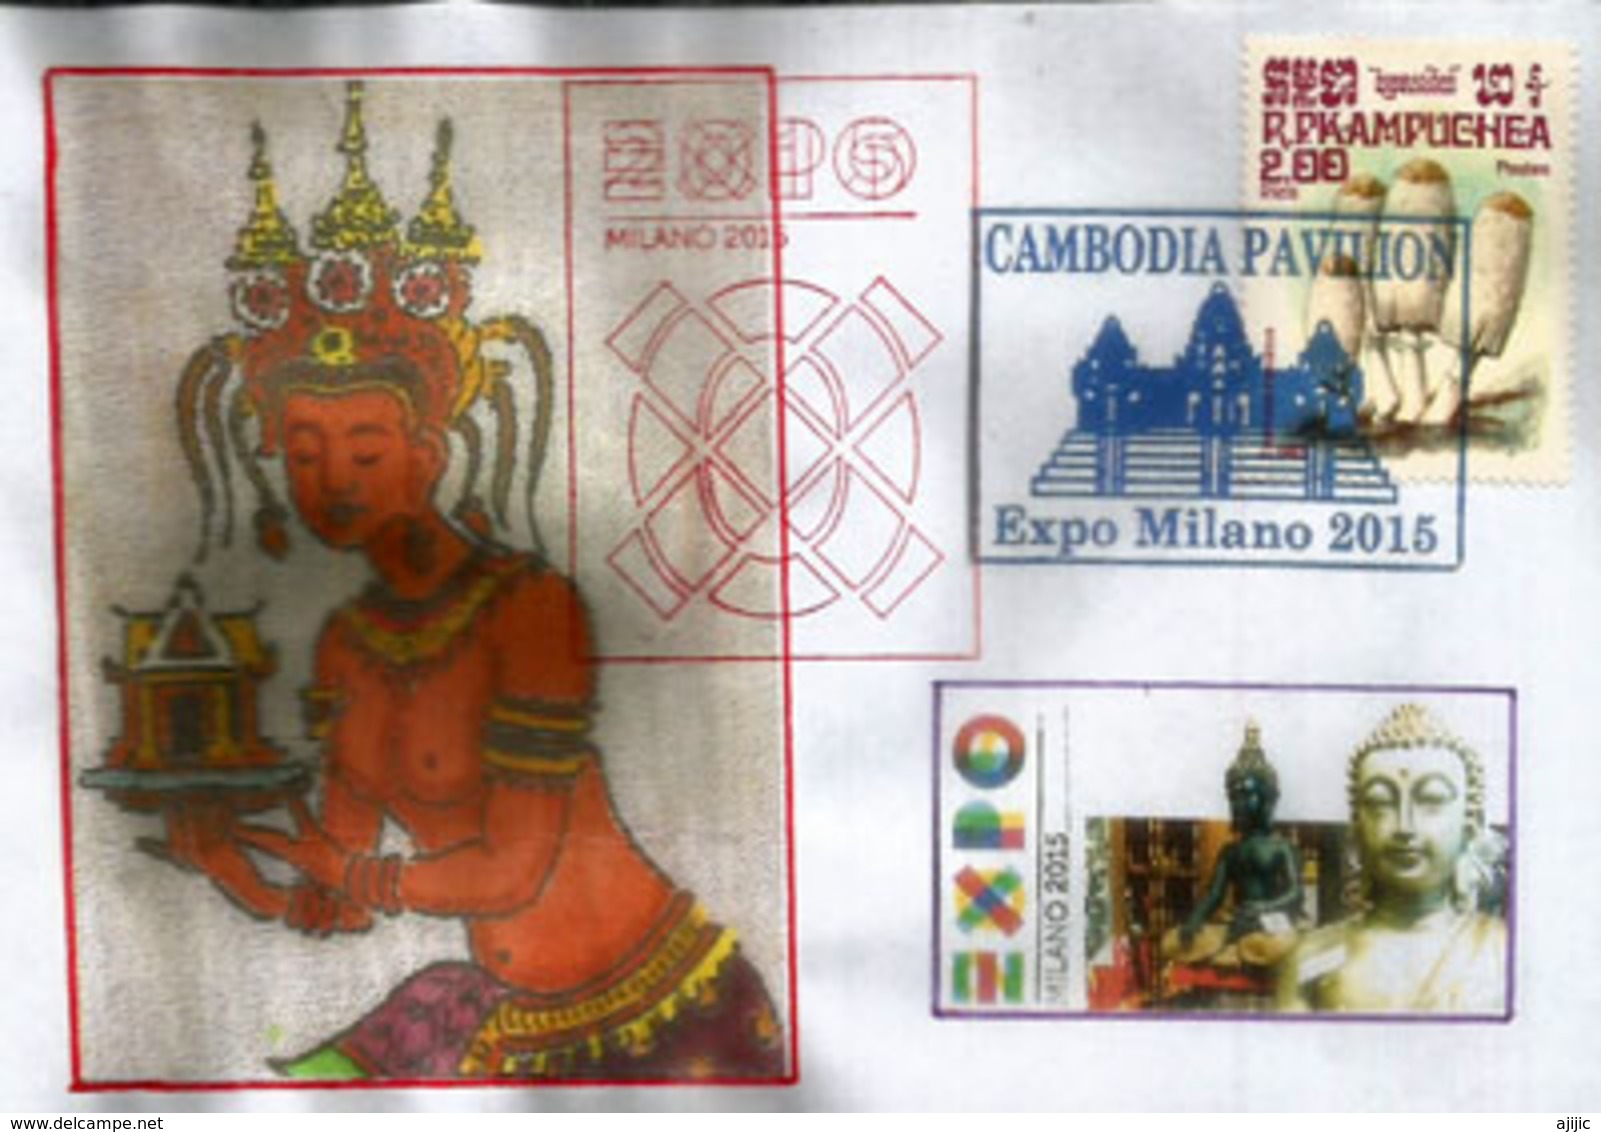 CAMBODIA/CAMBODGE.UNIVERSAL EXPO MILANO 2015 .Letter From The Cambodian Pavilion With Stamp Of Cambodia - Cambodia